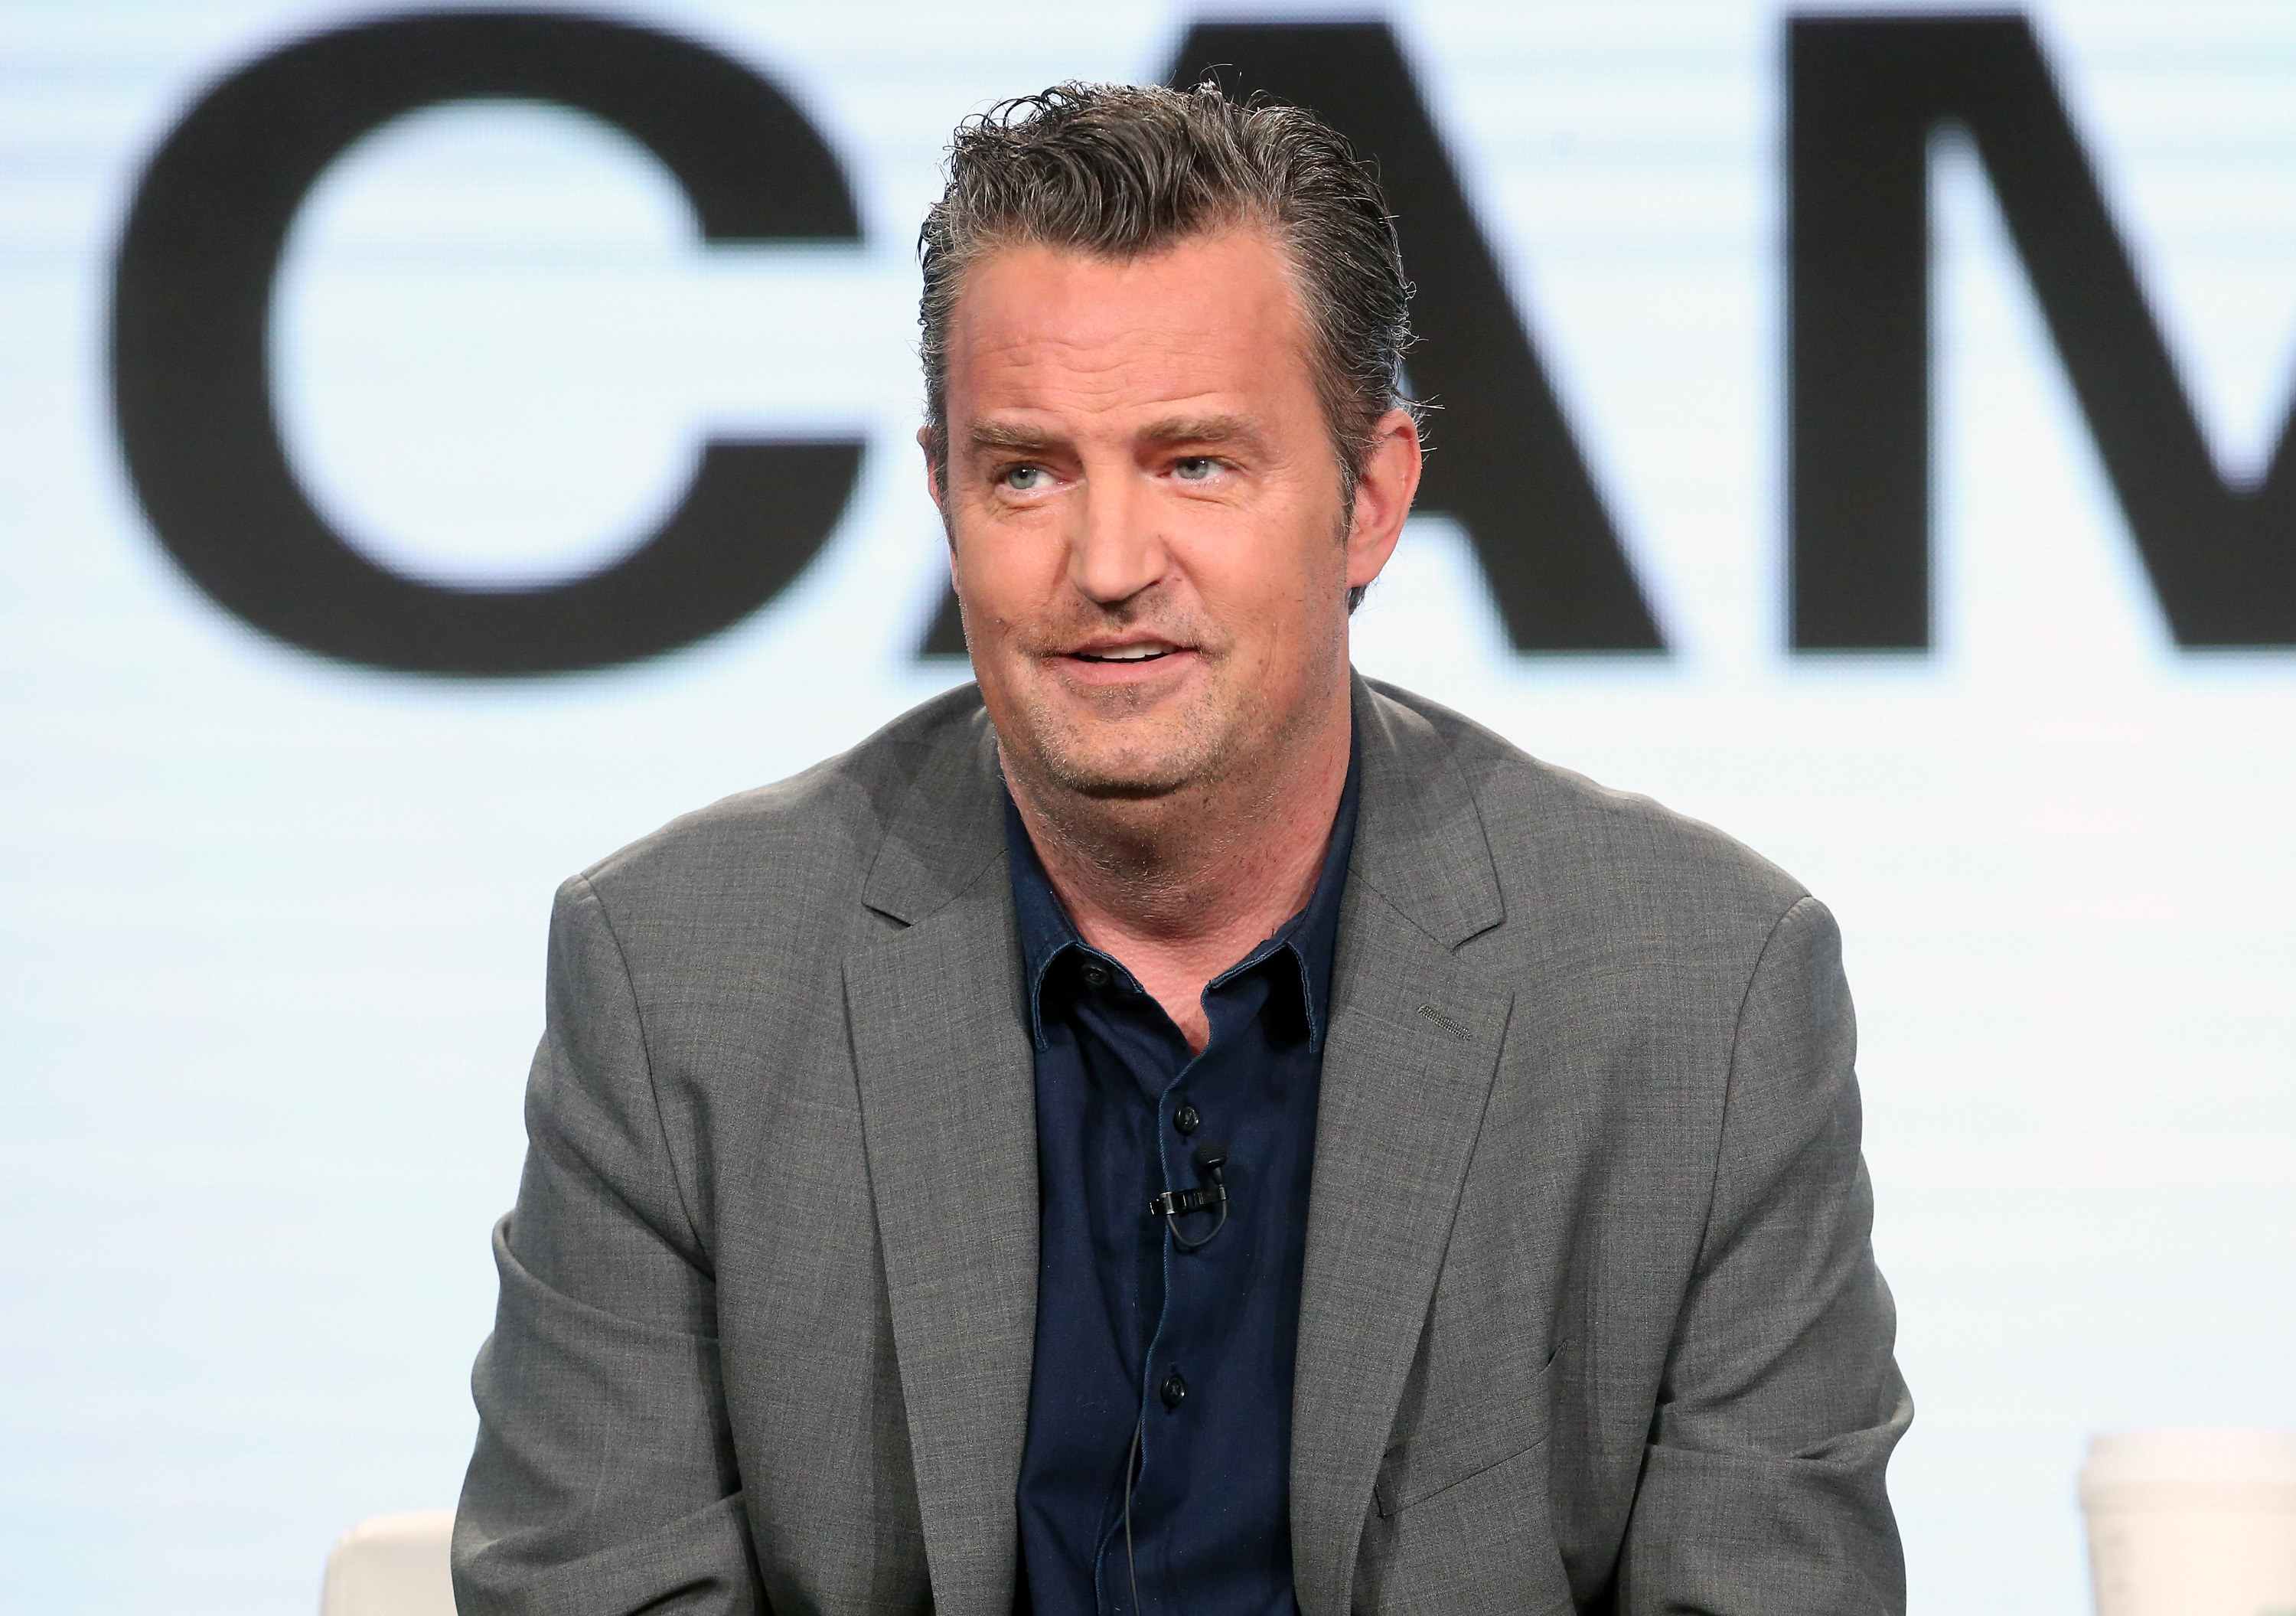 Actor Matthew Perry of the television show &#x27;The Kennedys - After Camelot&#x27; speaks onstage during the REELZChannel portion of the 2017 Winter Television Critics Association Press Tour